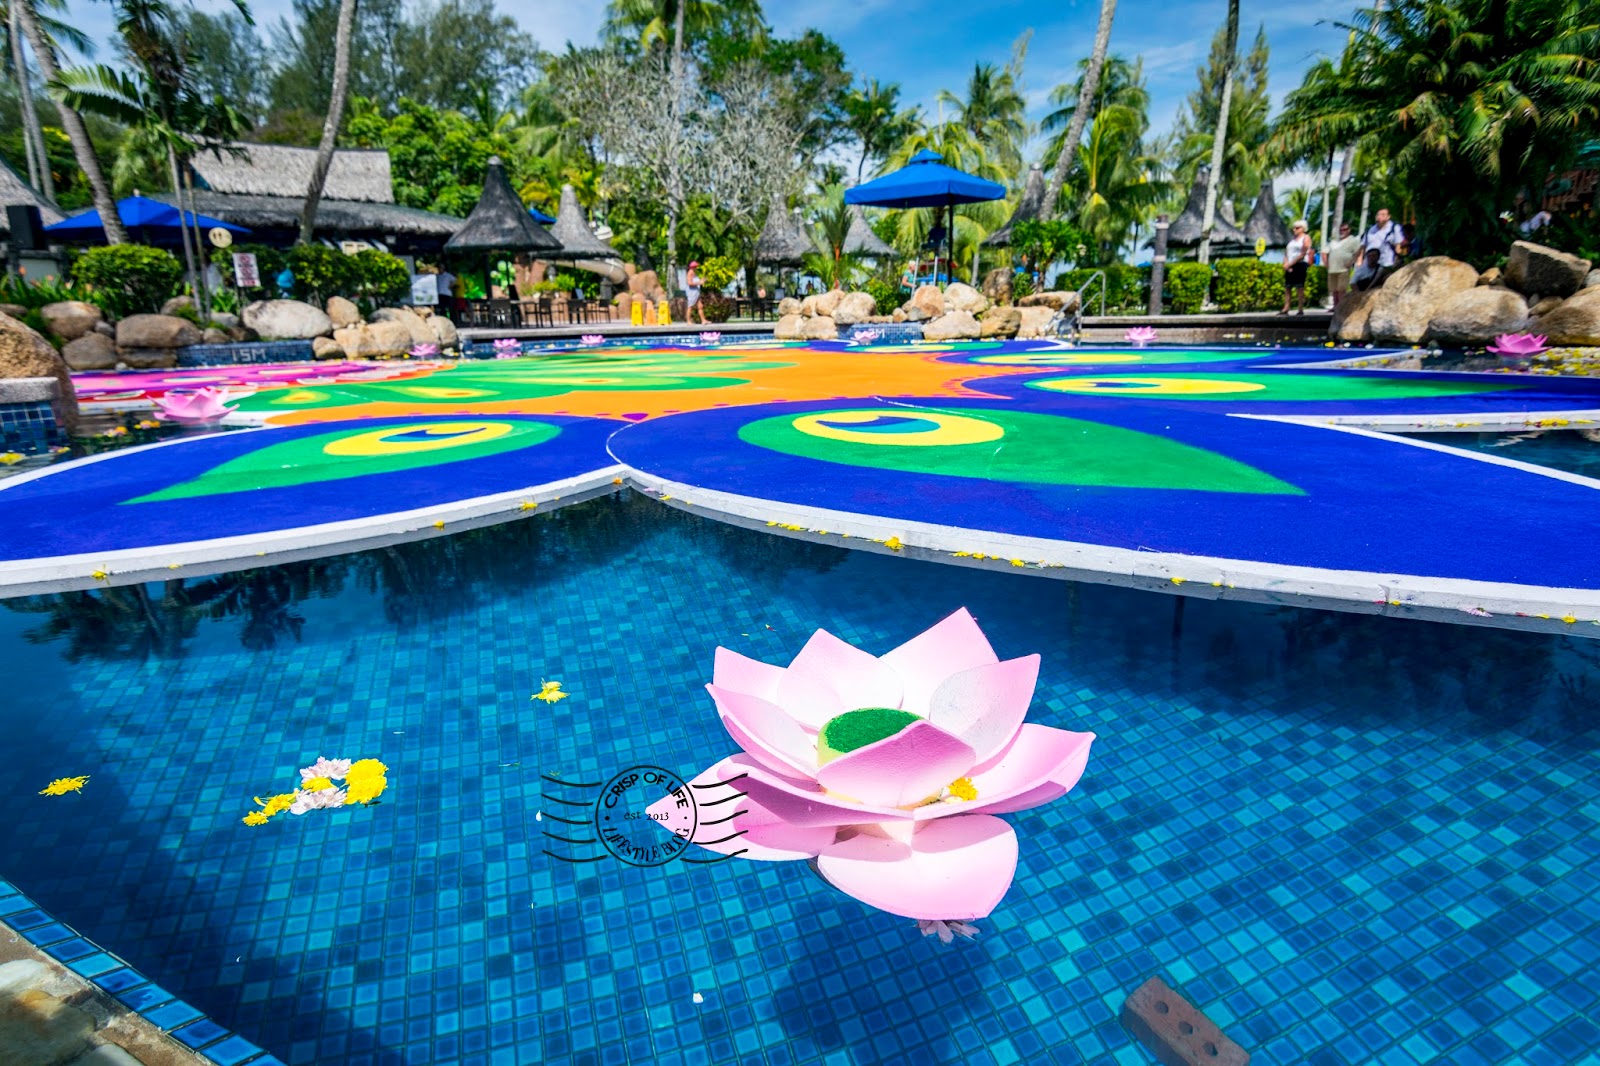 Penang's Golden Sand Resorts Created Malaysia's Largest Floating "Kolam" in the Pool